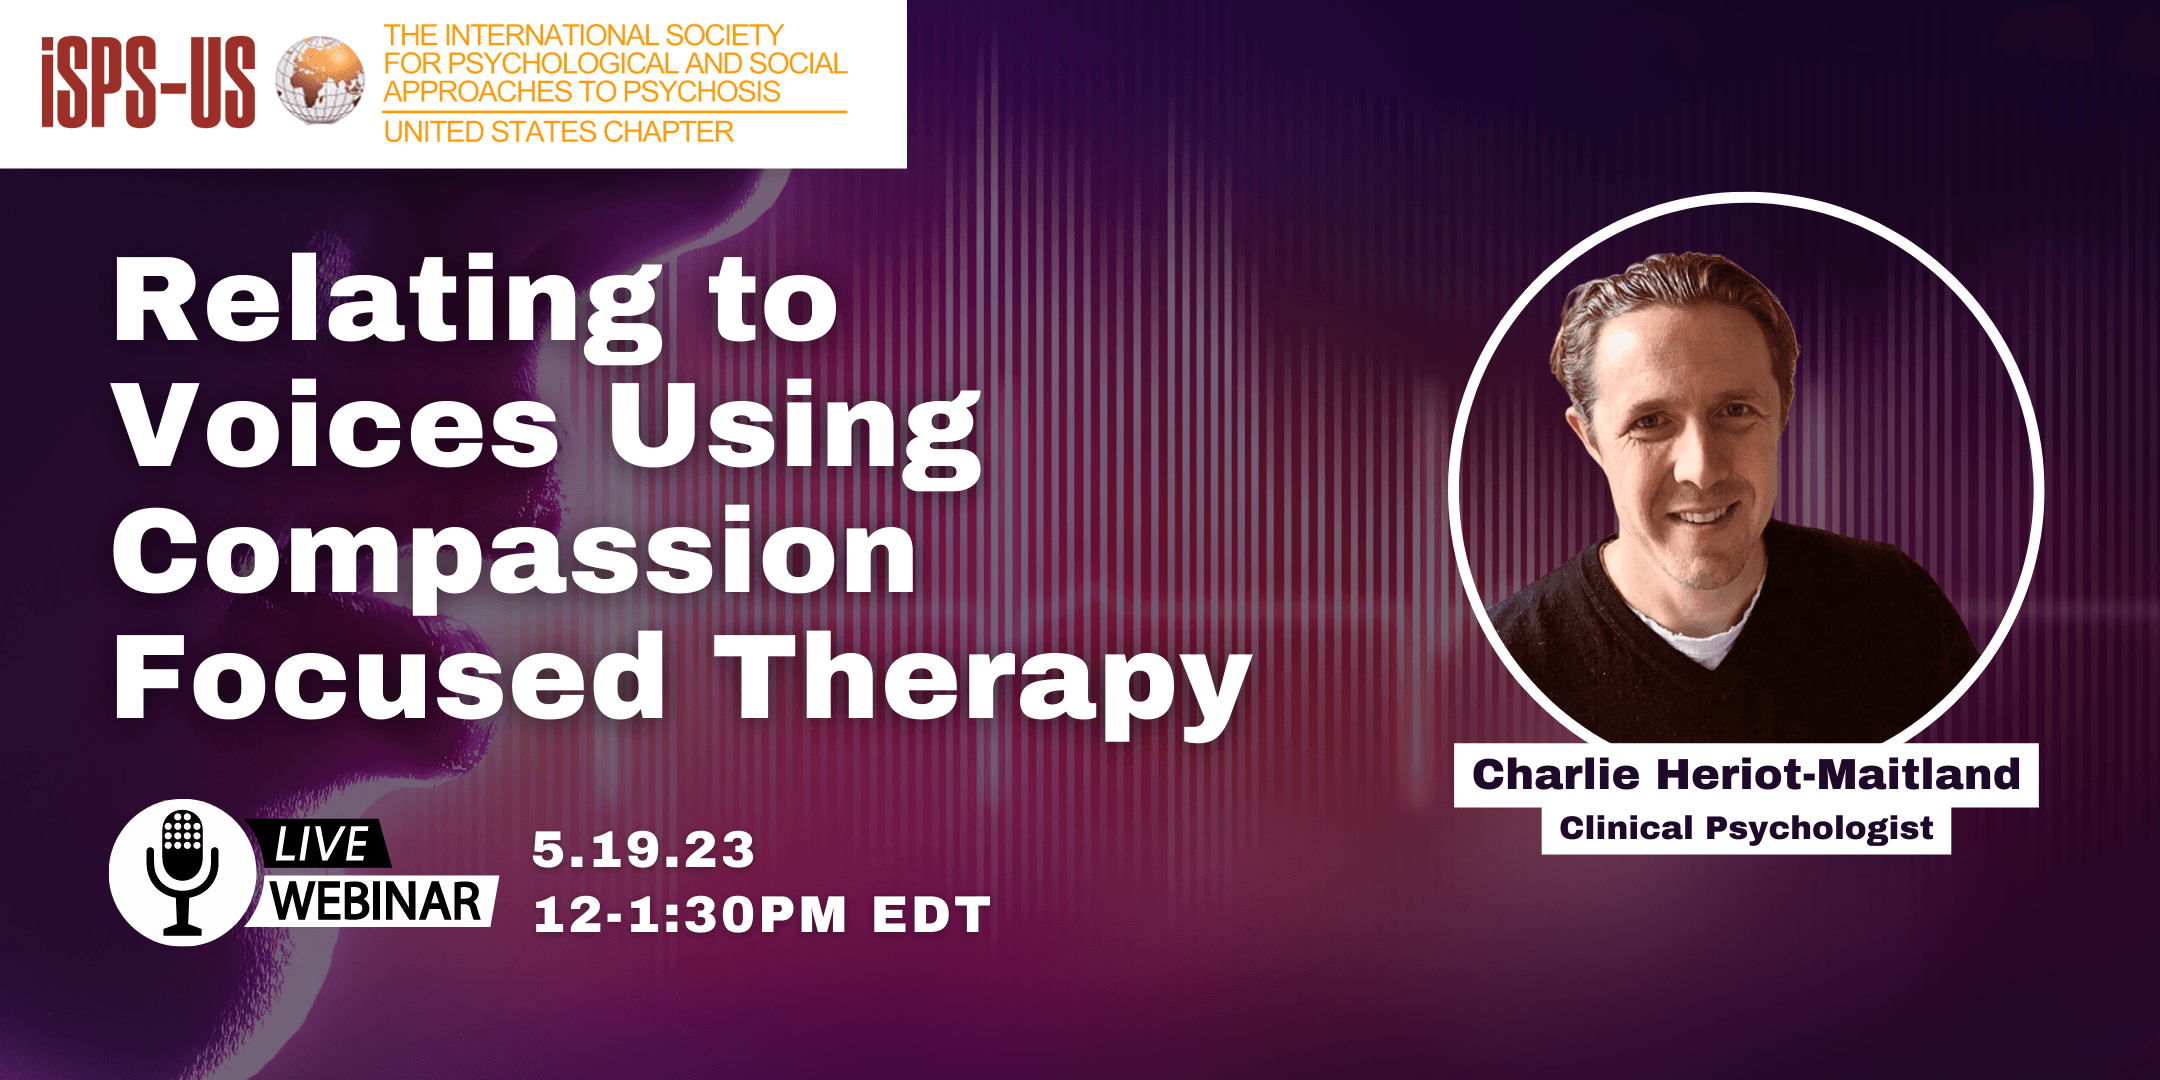 5/19/23 Webinar: Relating to Voices using Compassion Focused Therapy